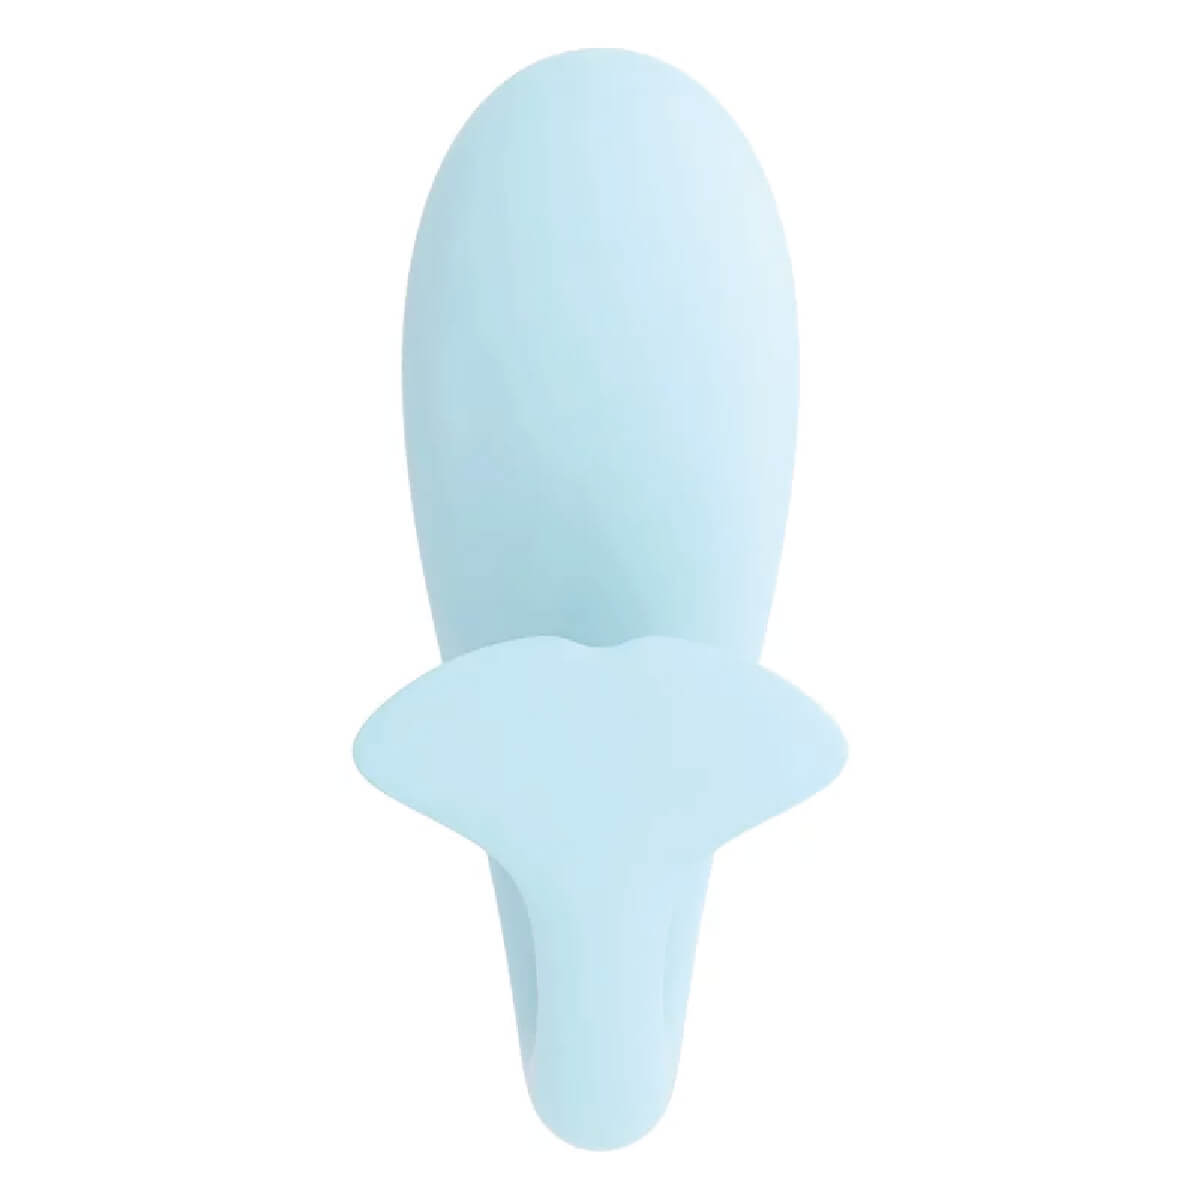 The beautiful design egg vibrator Doctor Whale by Monster Pub - Product image